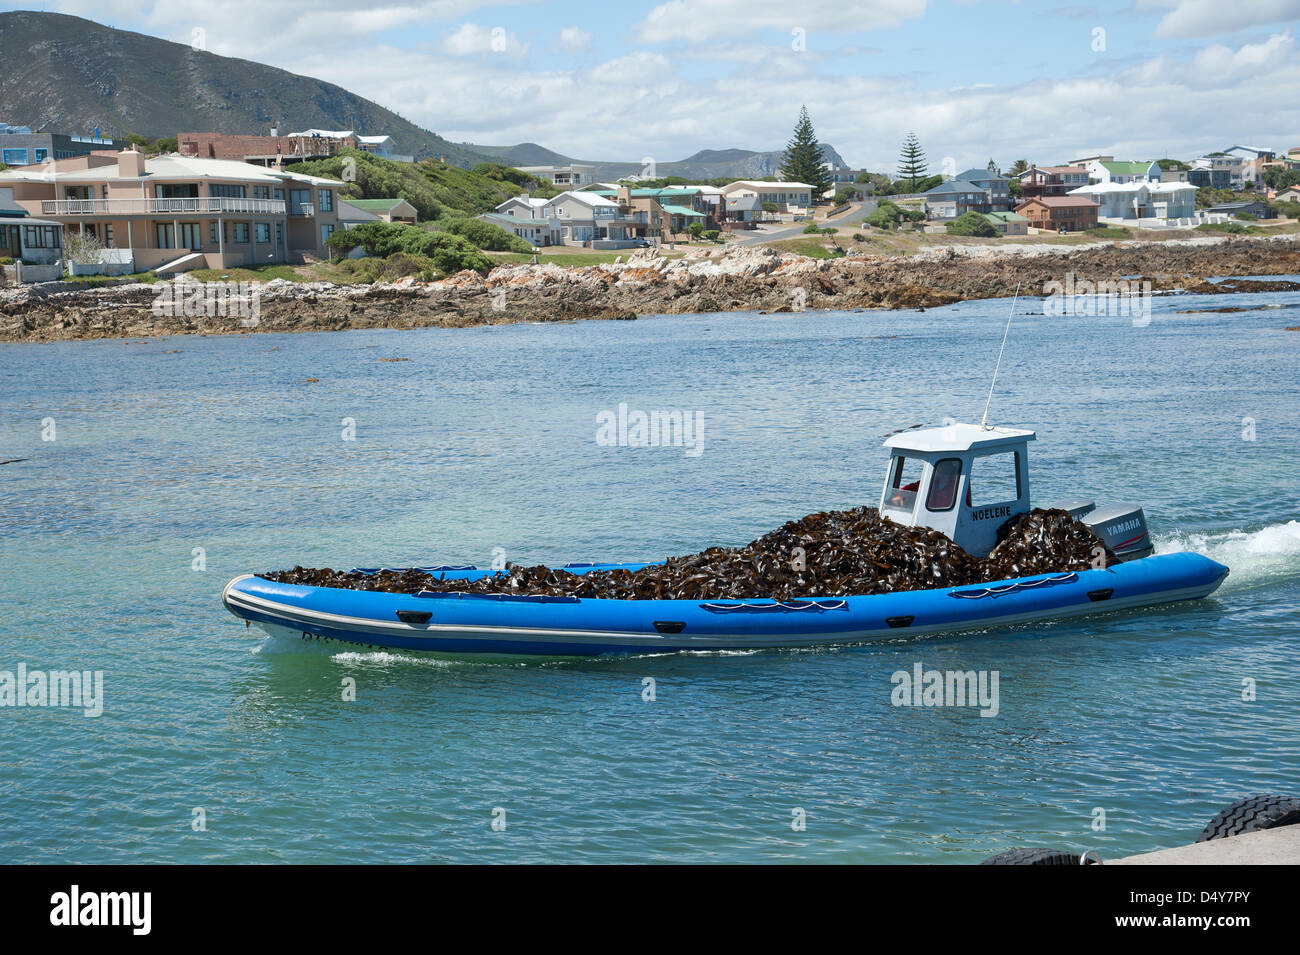 Seaweed industry. Bringing harvested seaweed ashore for the Taurus Chemical company at Kleinbaai Western Cape South Africa Stock Photo